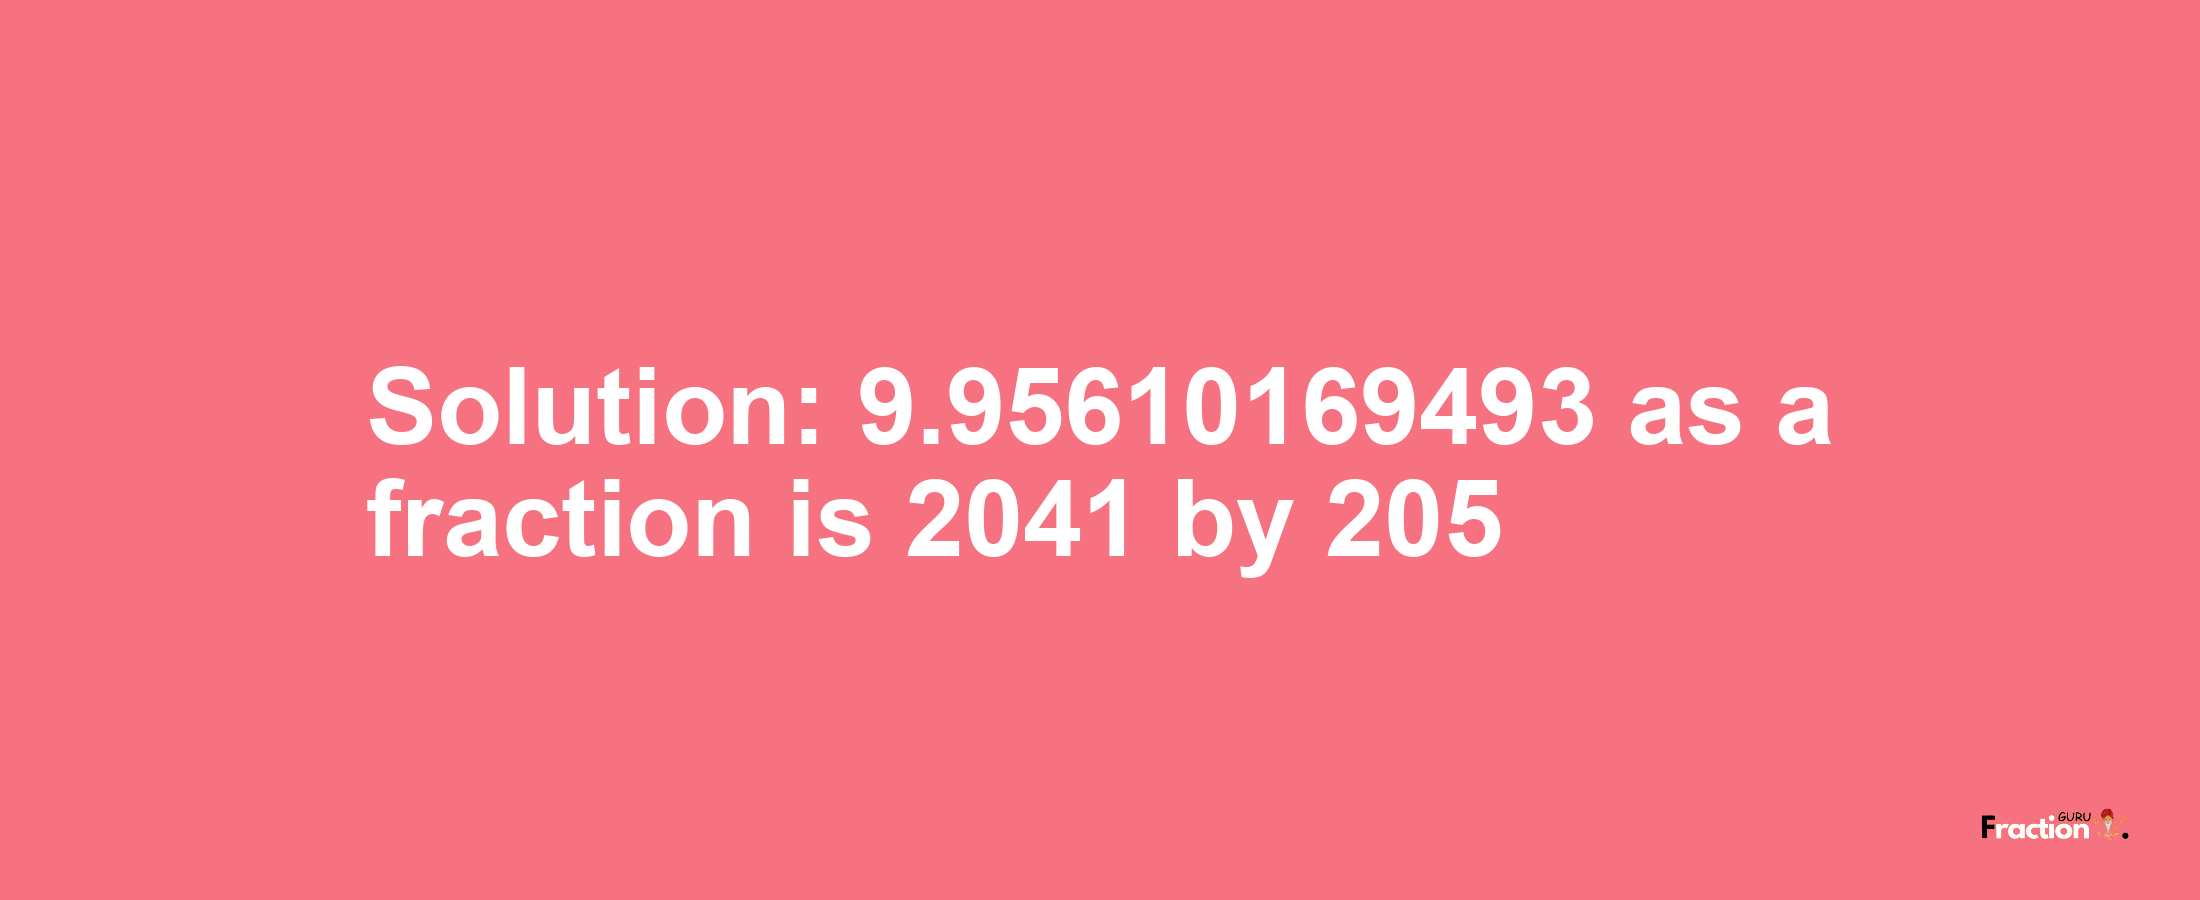 Solution:9.95610169493 as a fraction is 2041/205